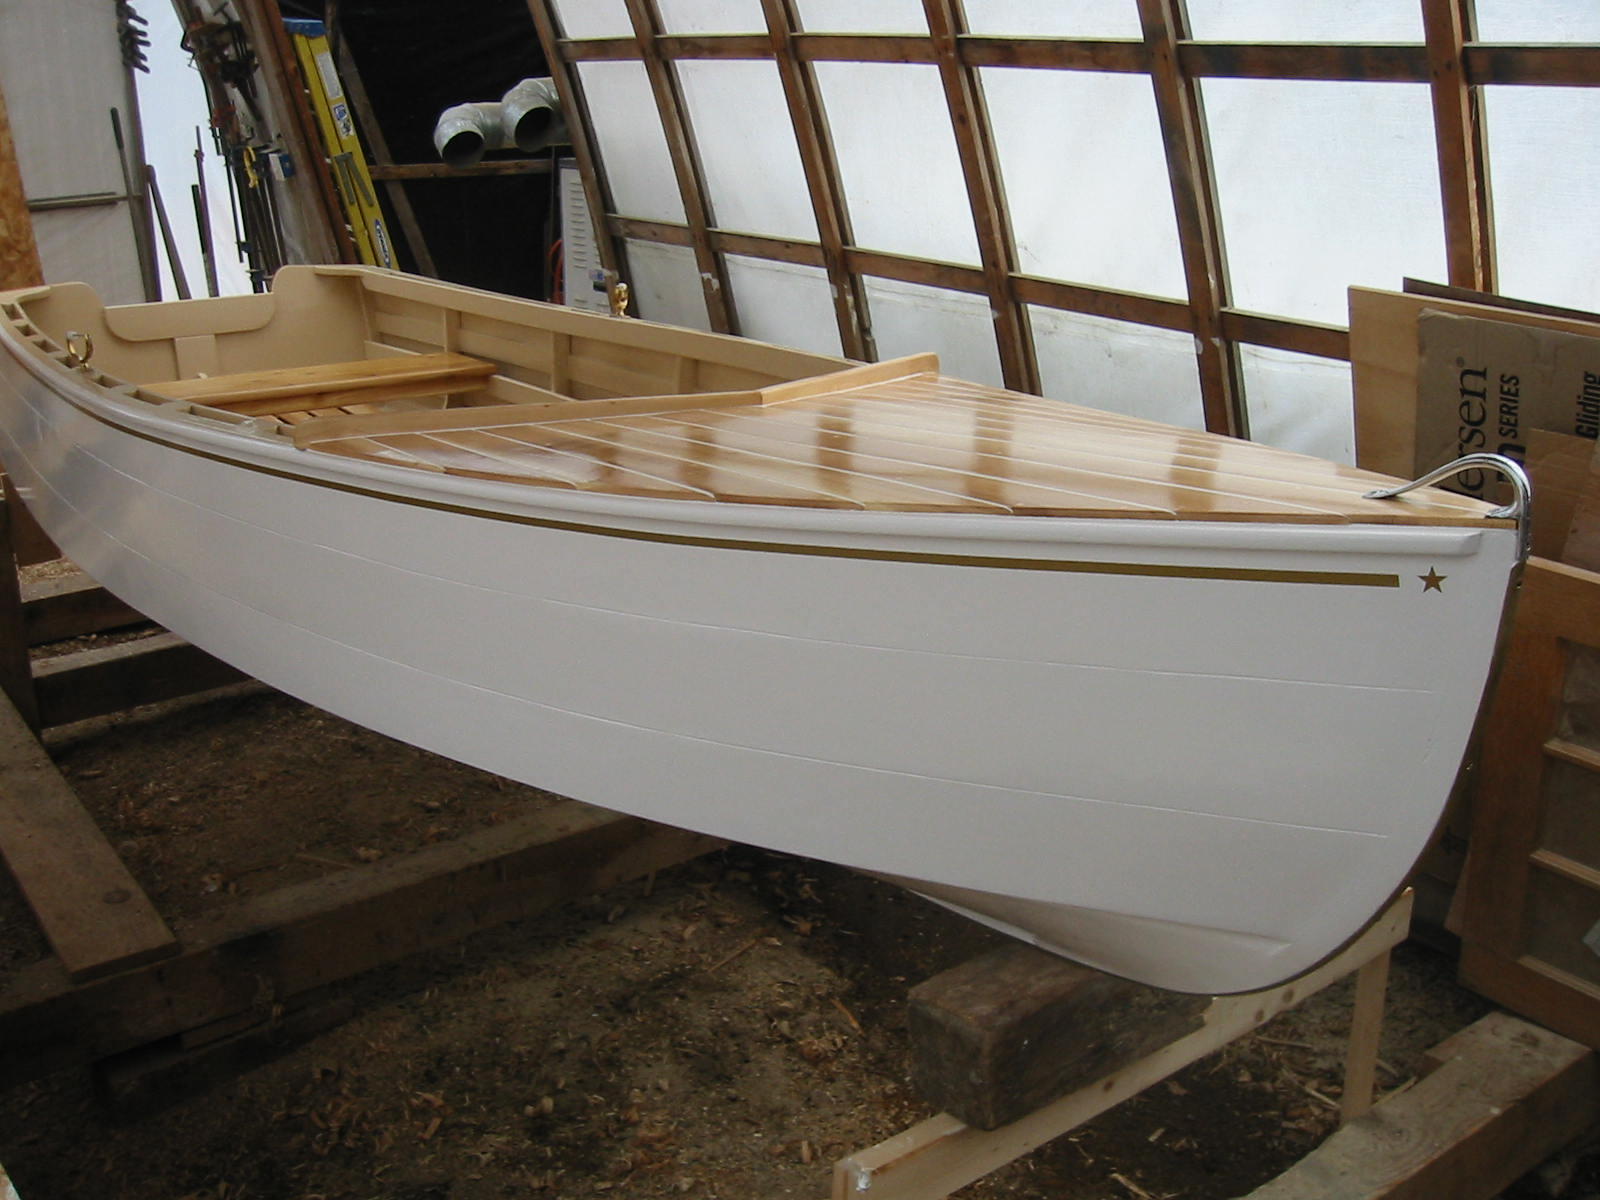 wooden boat dory how to build diy pdf download uk